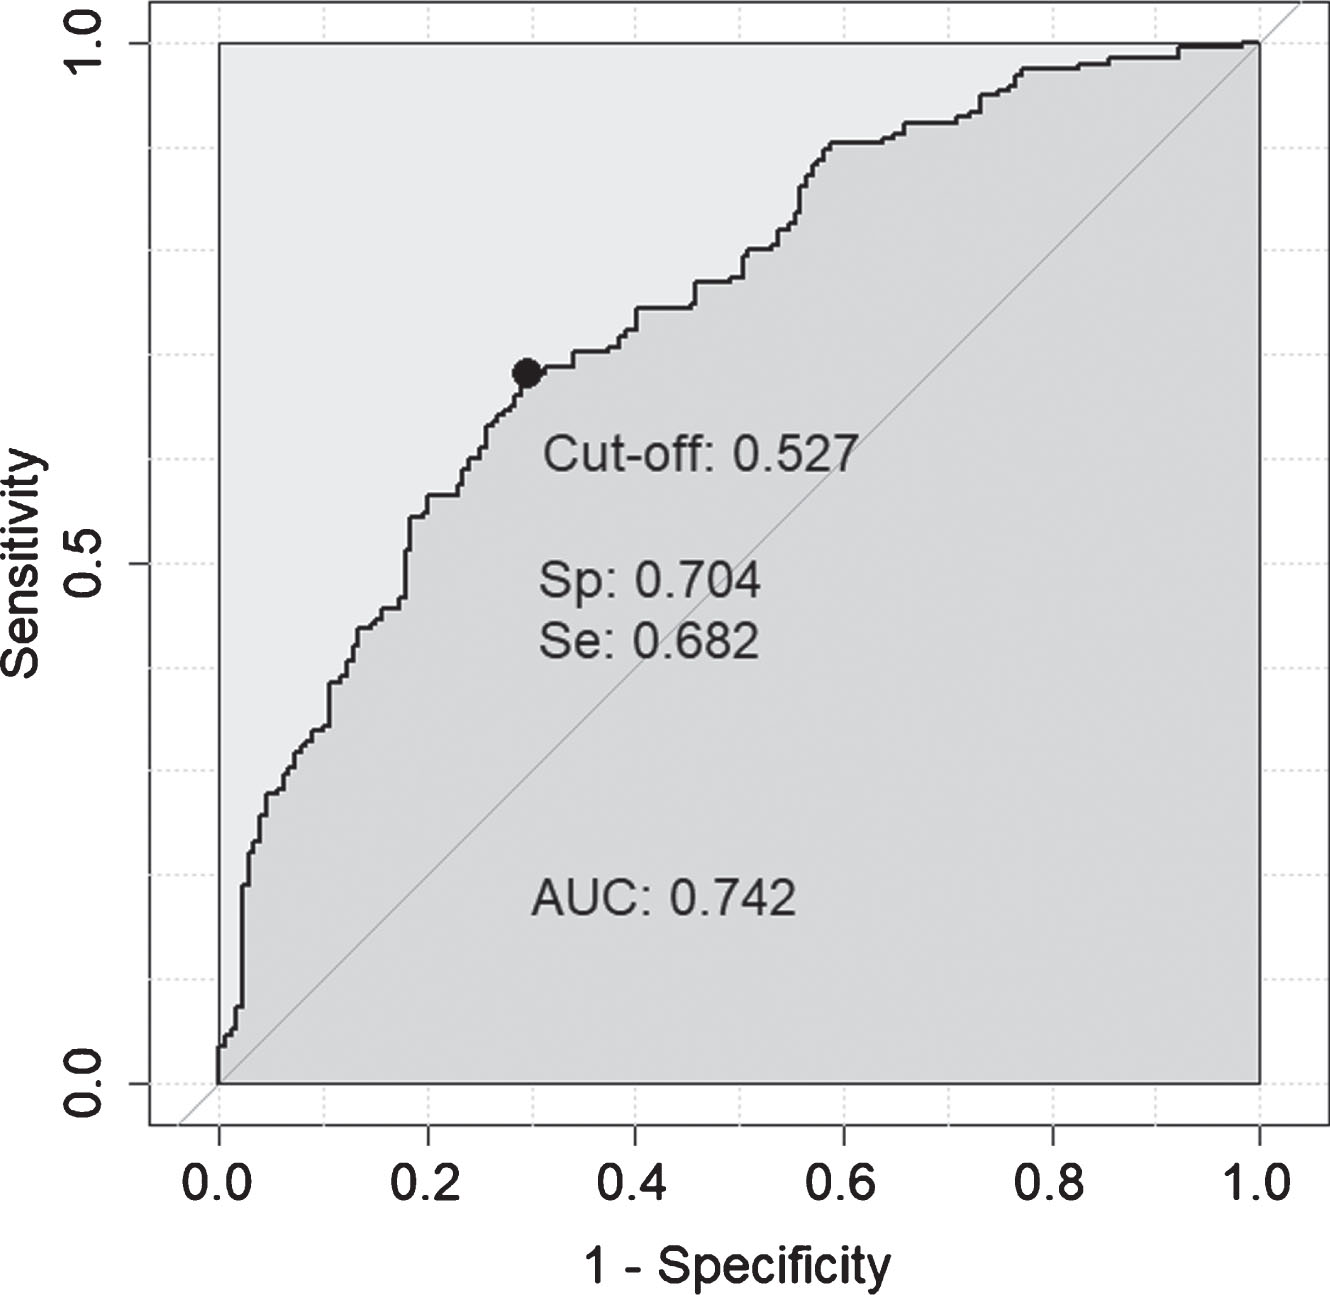 ROC curve obtained for the 8-feature classifier for prediction of amyloid normal/abnormal status. The 8-features included were: FCN2, B2M, apoE, A1AT, CC4, cathepsin D, CFI, and age.